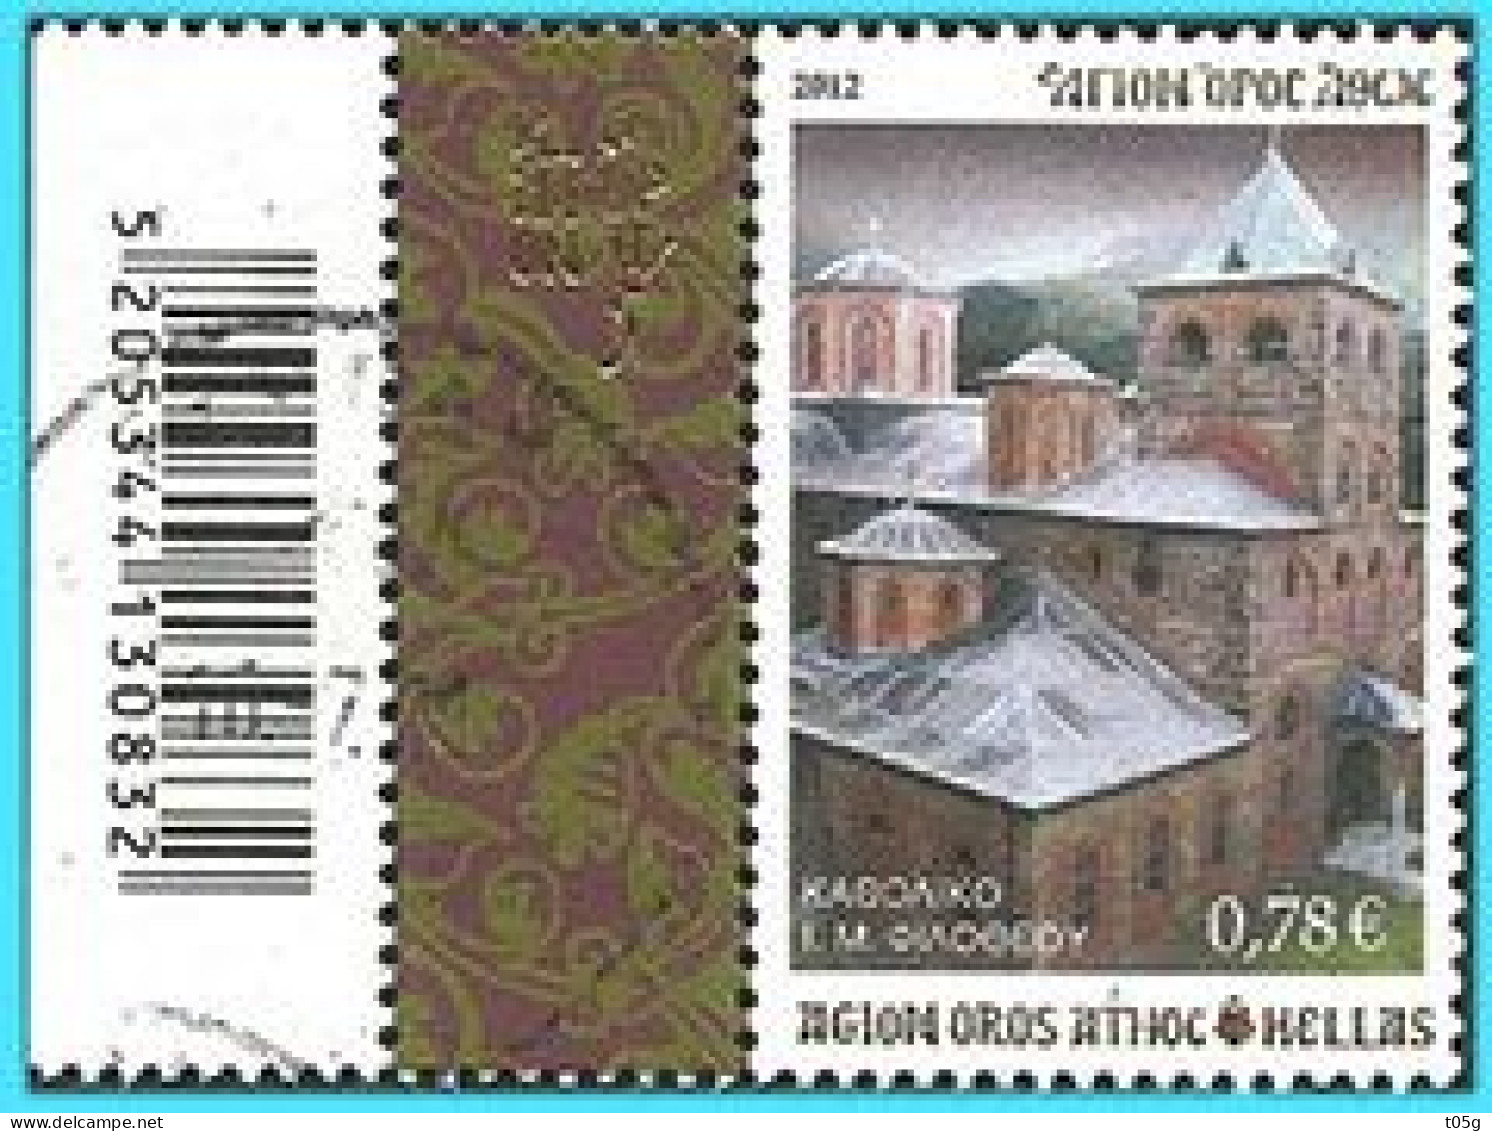 GREECE- GRECE- HELLAS - AGION OROS 2012: 0.78€  (with Barcode) From Set Used - Gebraucht